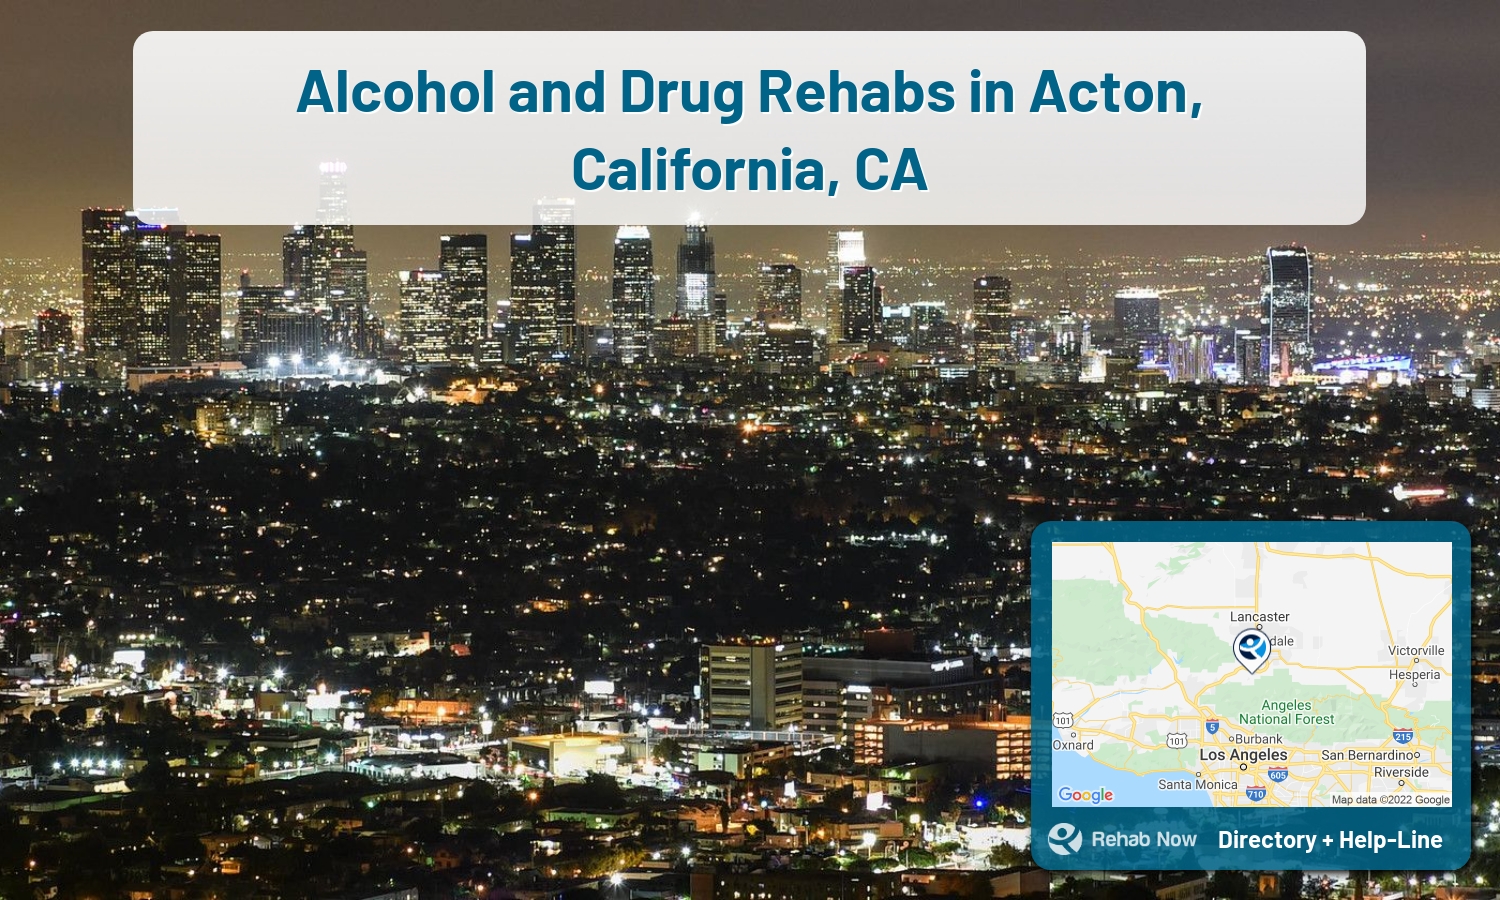 Acton, CA Treatment Centers. Find drug rehab in Acton, California, or detox and treatment programs. Get the right help now!